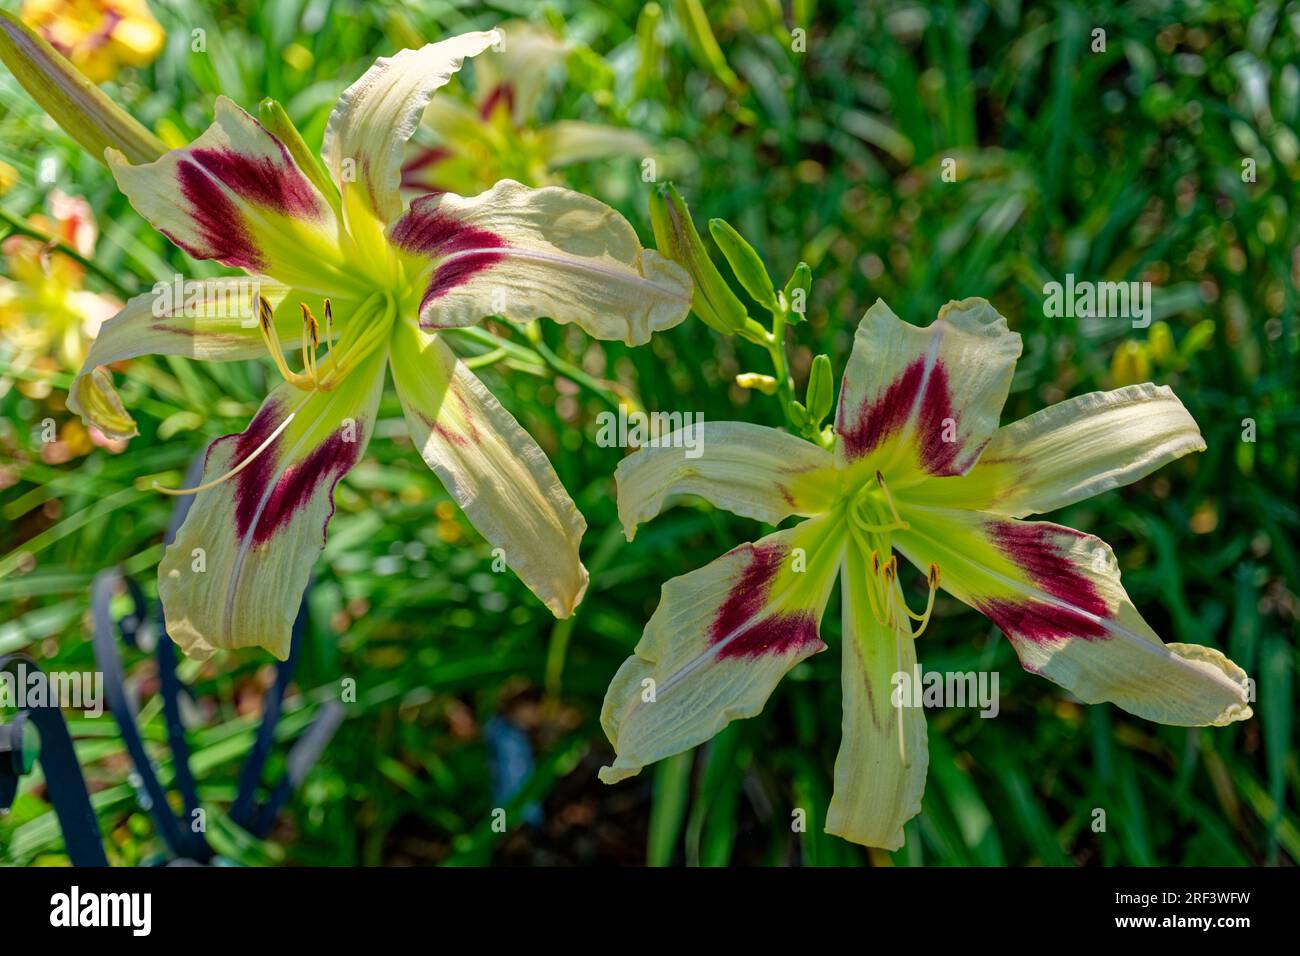 Two large petal daylilies in full bloom light yellow with red markings and a deeper yellow center surrounded by buds to open and lush green foliage cl Stock Photo